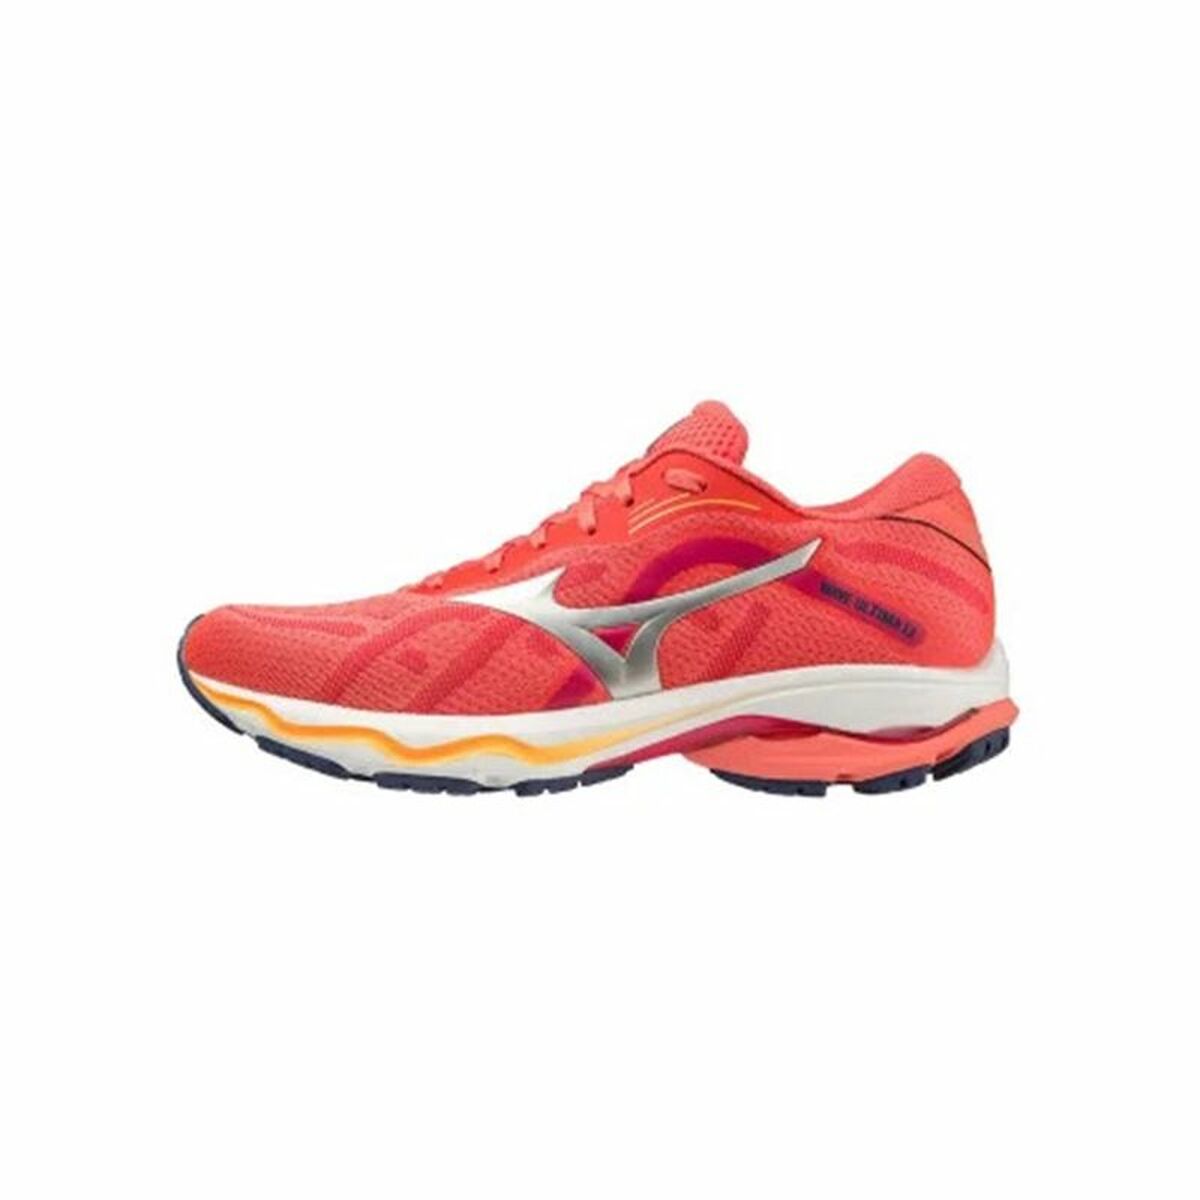 Running Shoes for Adults Mizuno Wave Ultima 13 Lady Orange